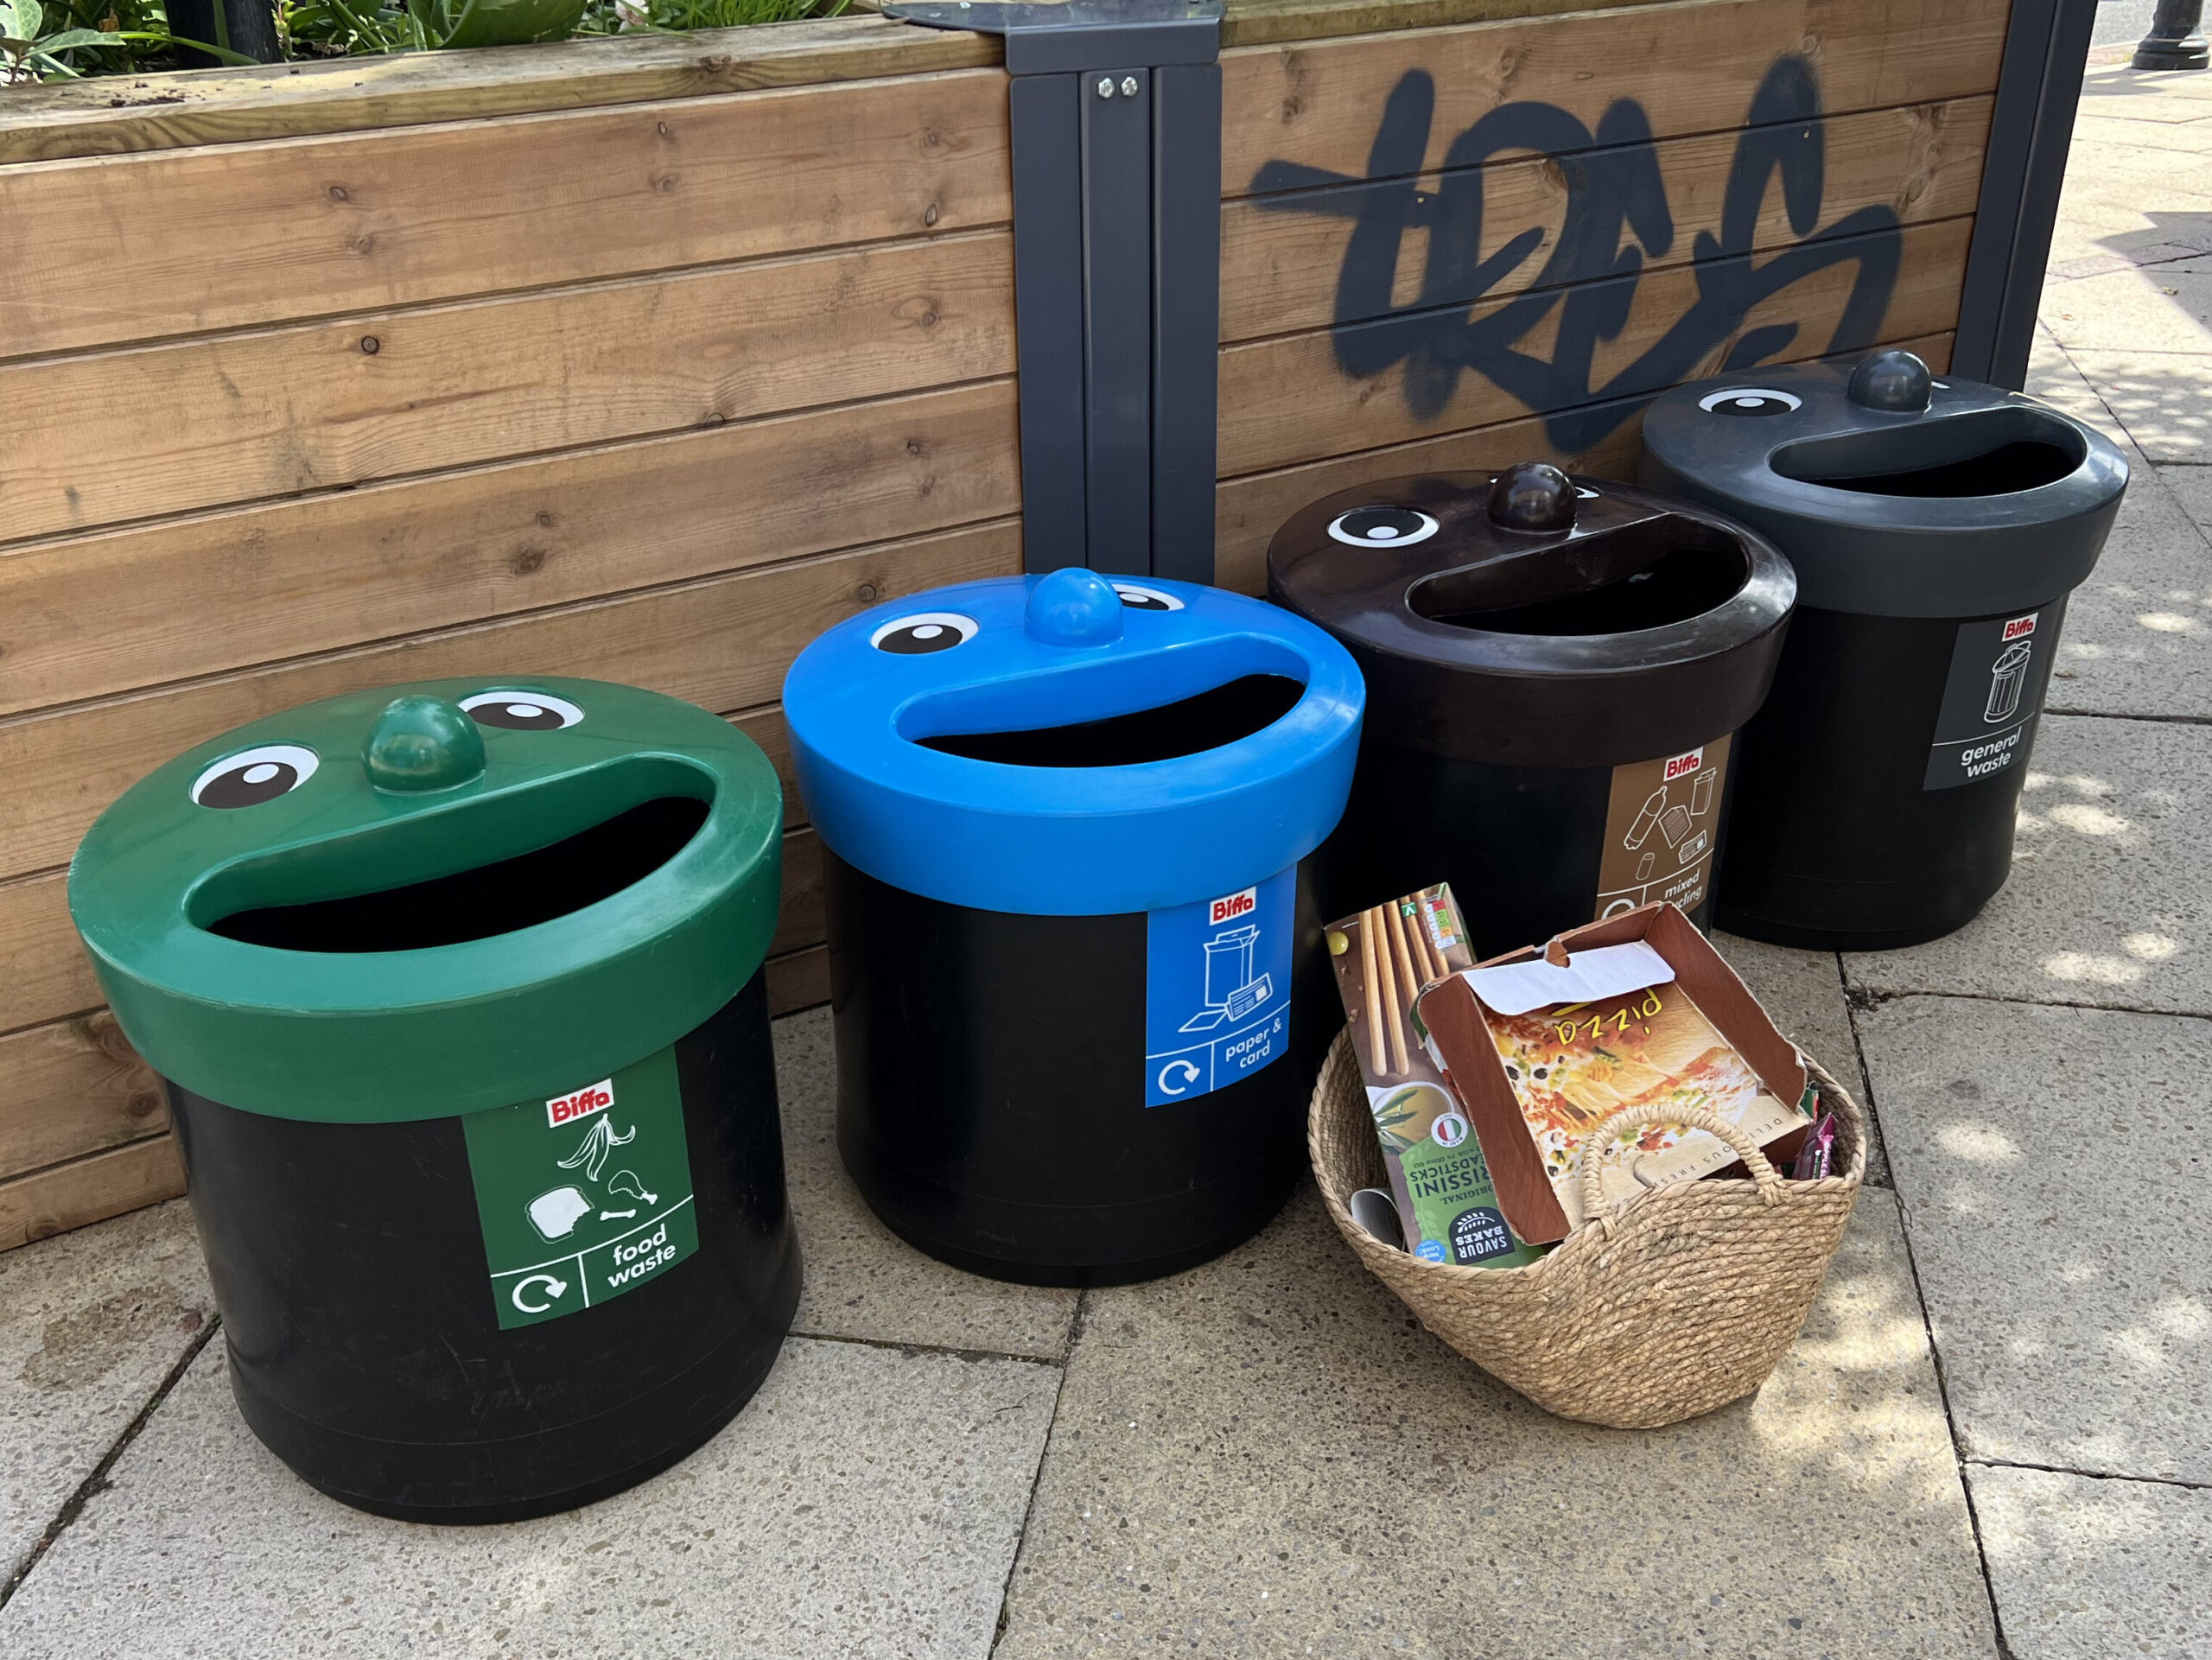 Biffa's bins to demonstrate recycling. Green, Blue, Brown and Black bins. Green is for food waste. Blue is for paper and card. Brown for mixed recycling and black for general waste.